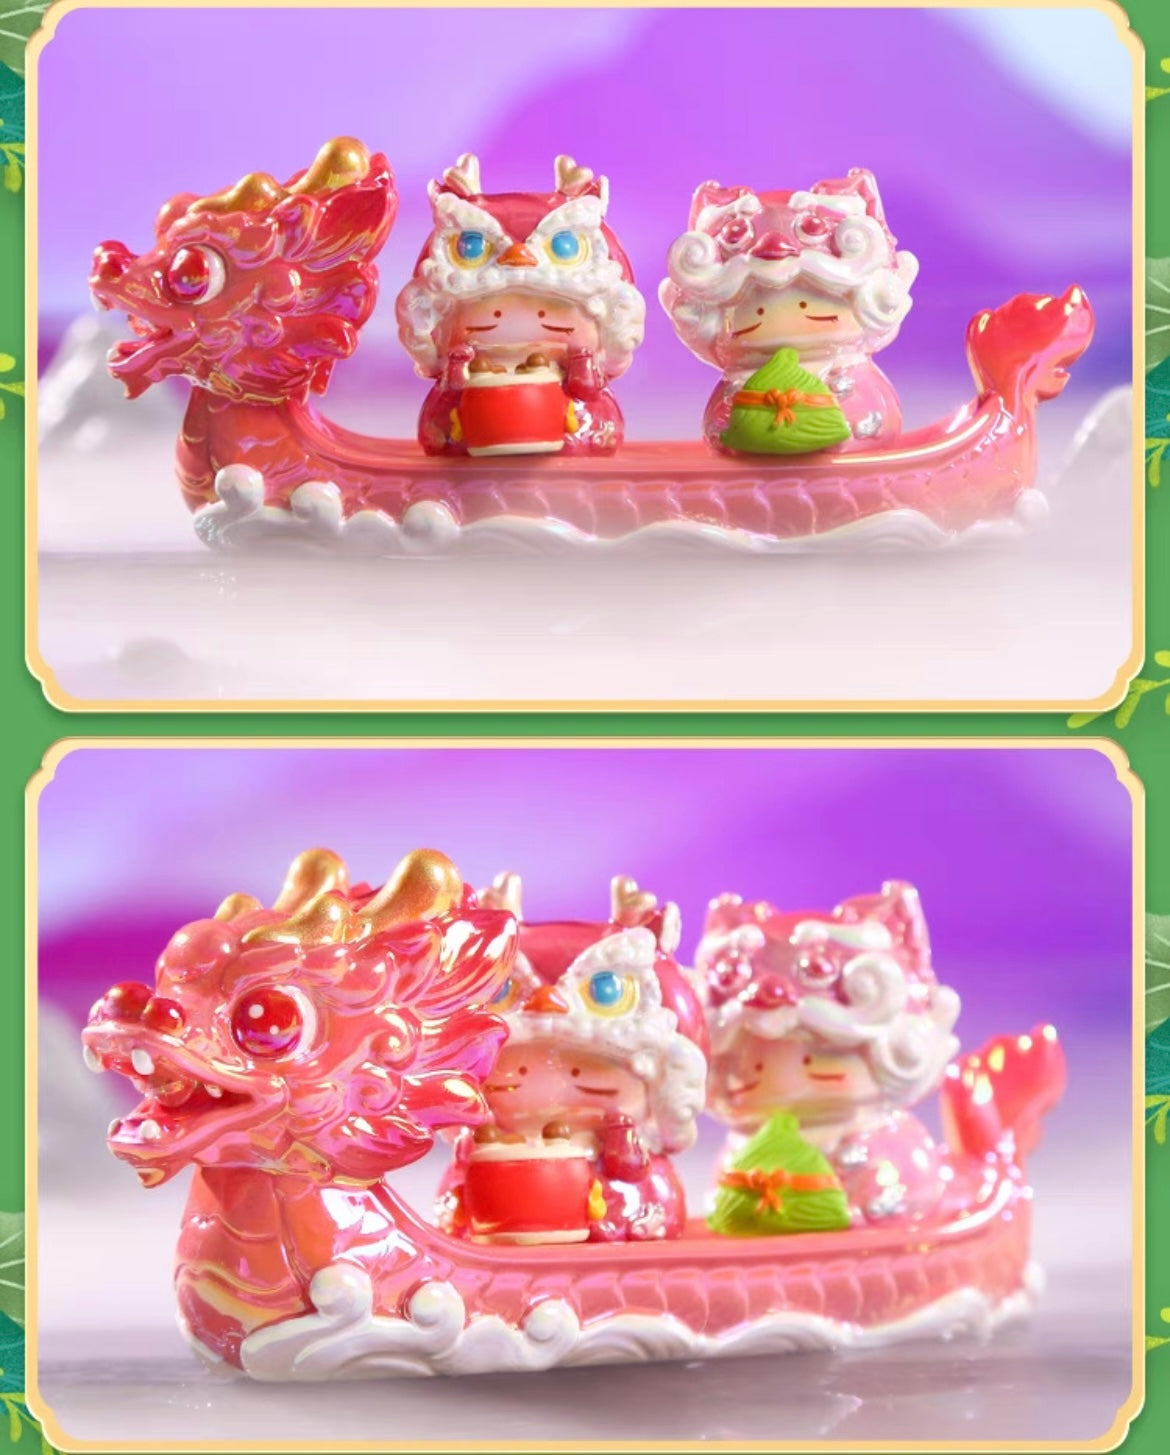 【NEW ARRIVAL】Donghai Dragon Boat